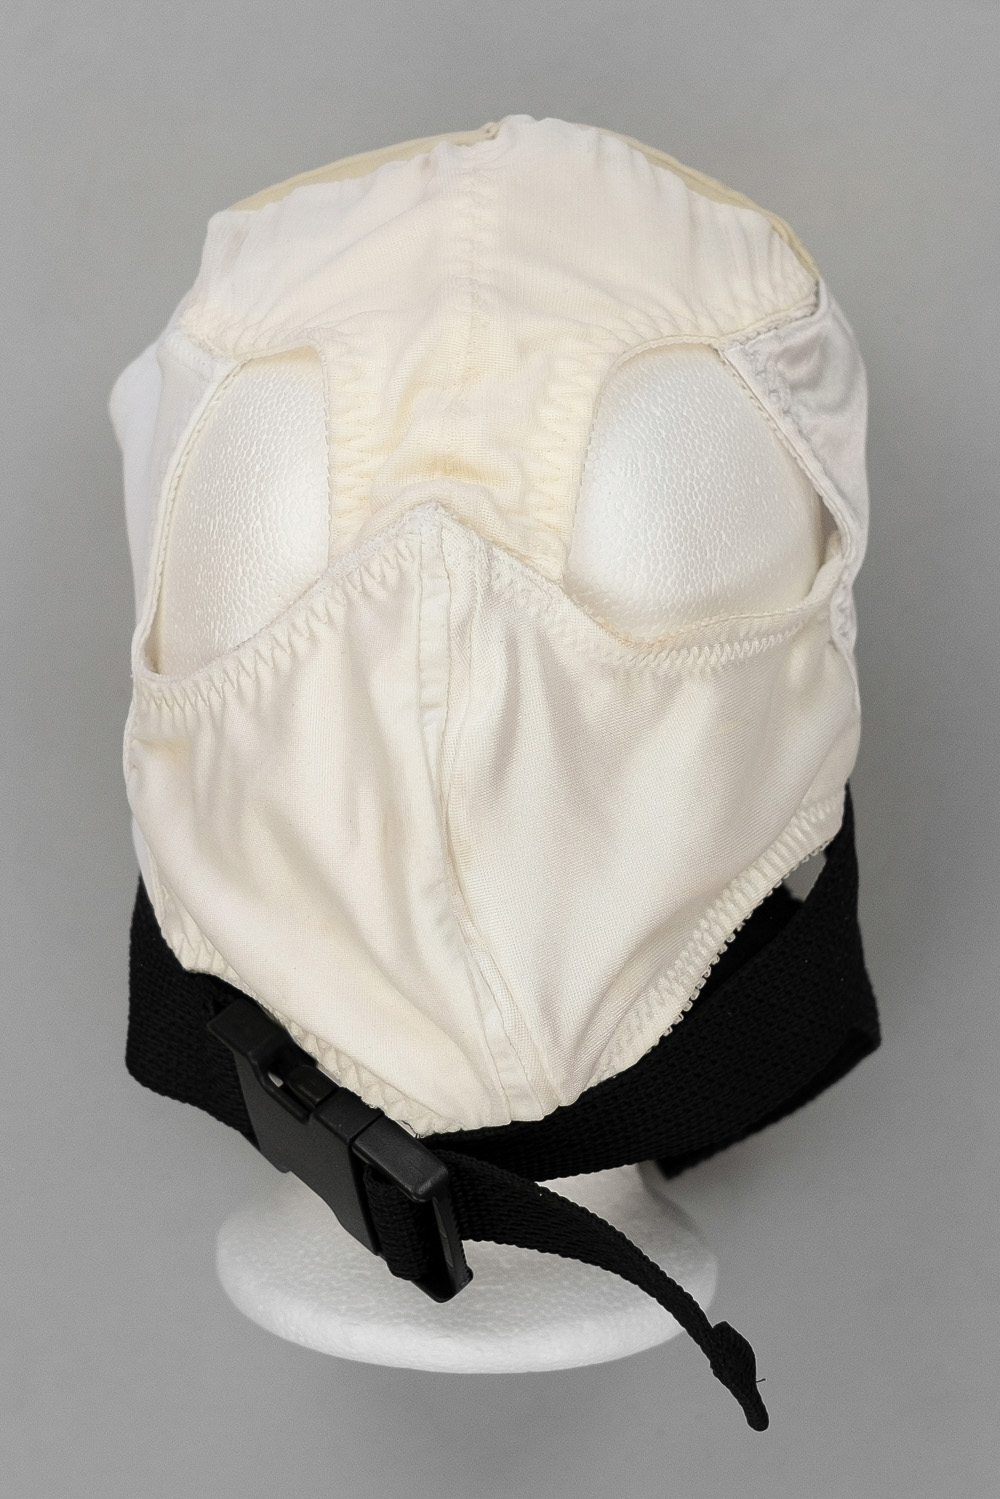 Gusset Mask in Black and White 6